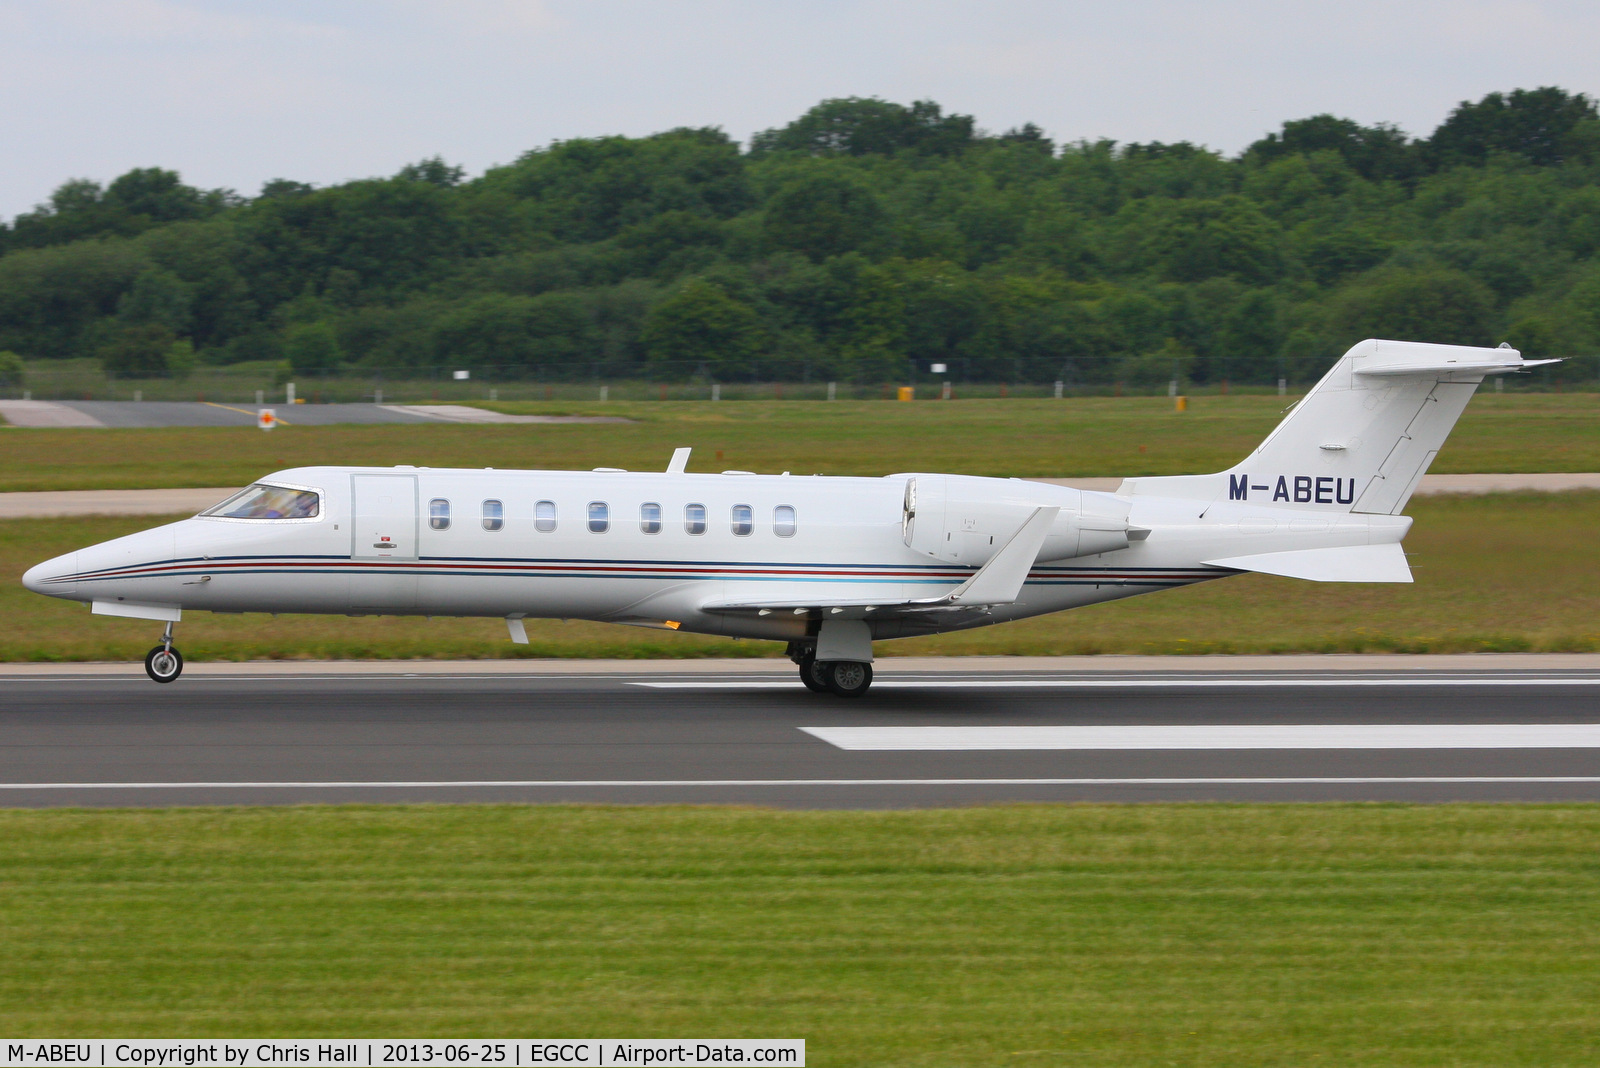 M-ABEU, 2009 Learjet 45 C/N 45-374, used by Ryanair to ferry engineers to repair any problems with their aircraft